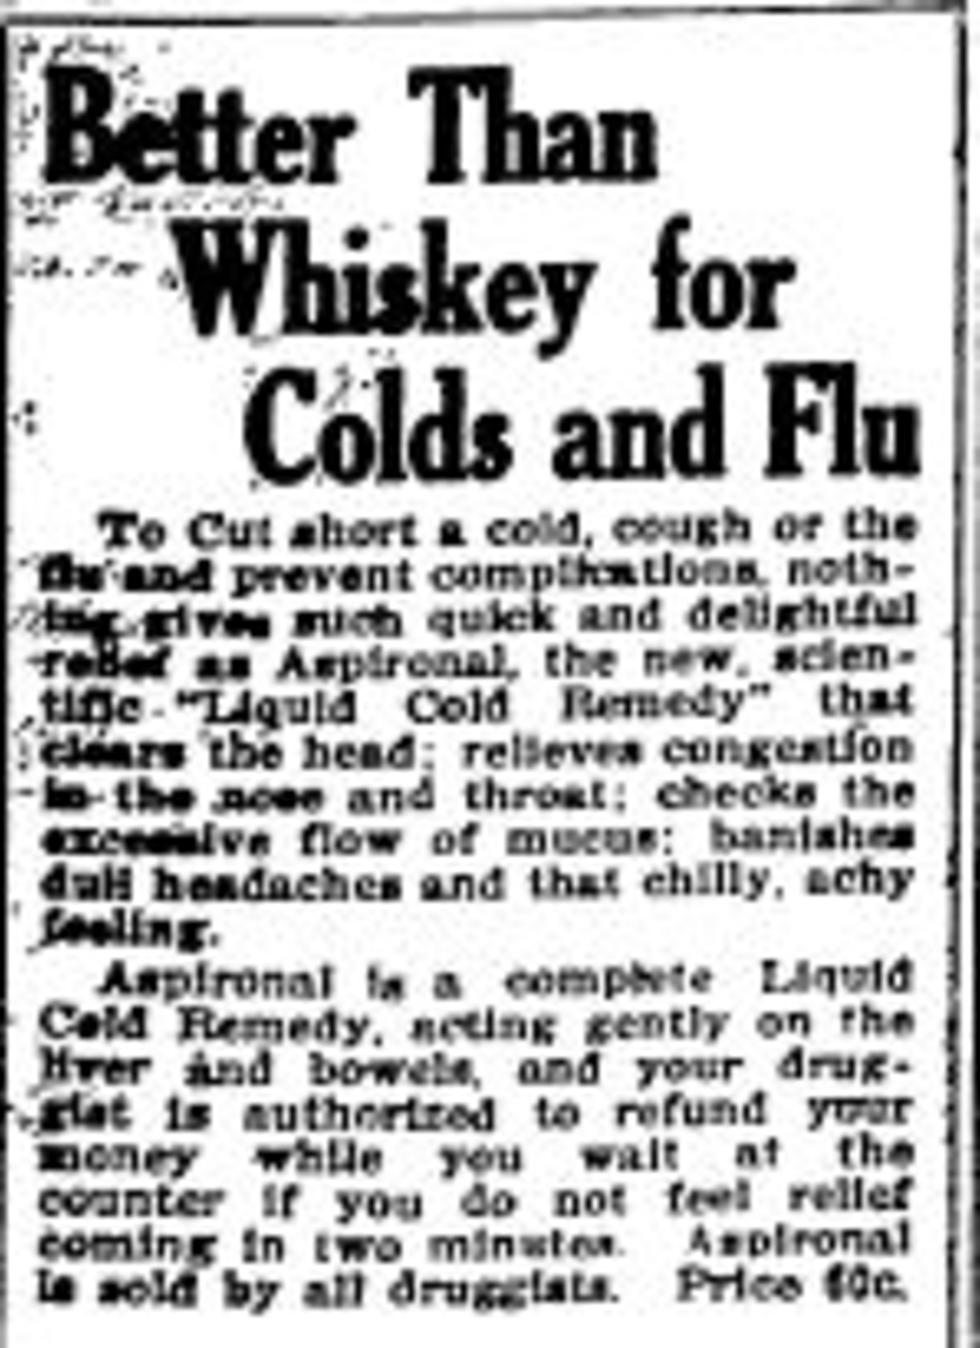 Harmon&#8217;s Histories: Elixirs promised better relief from cold, flu than whiskey